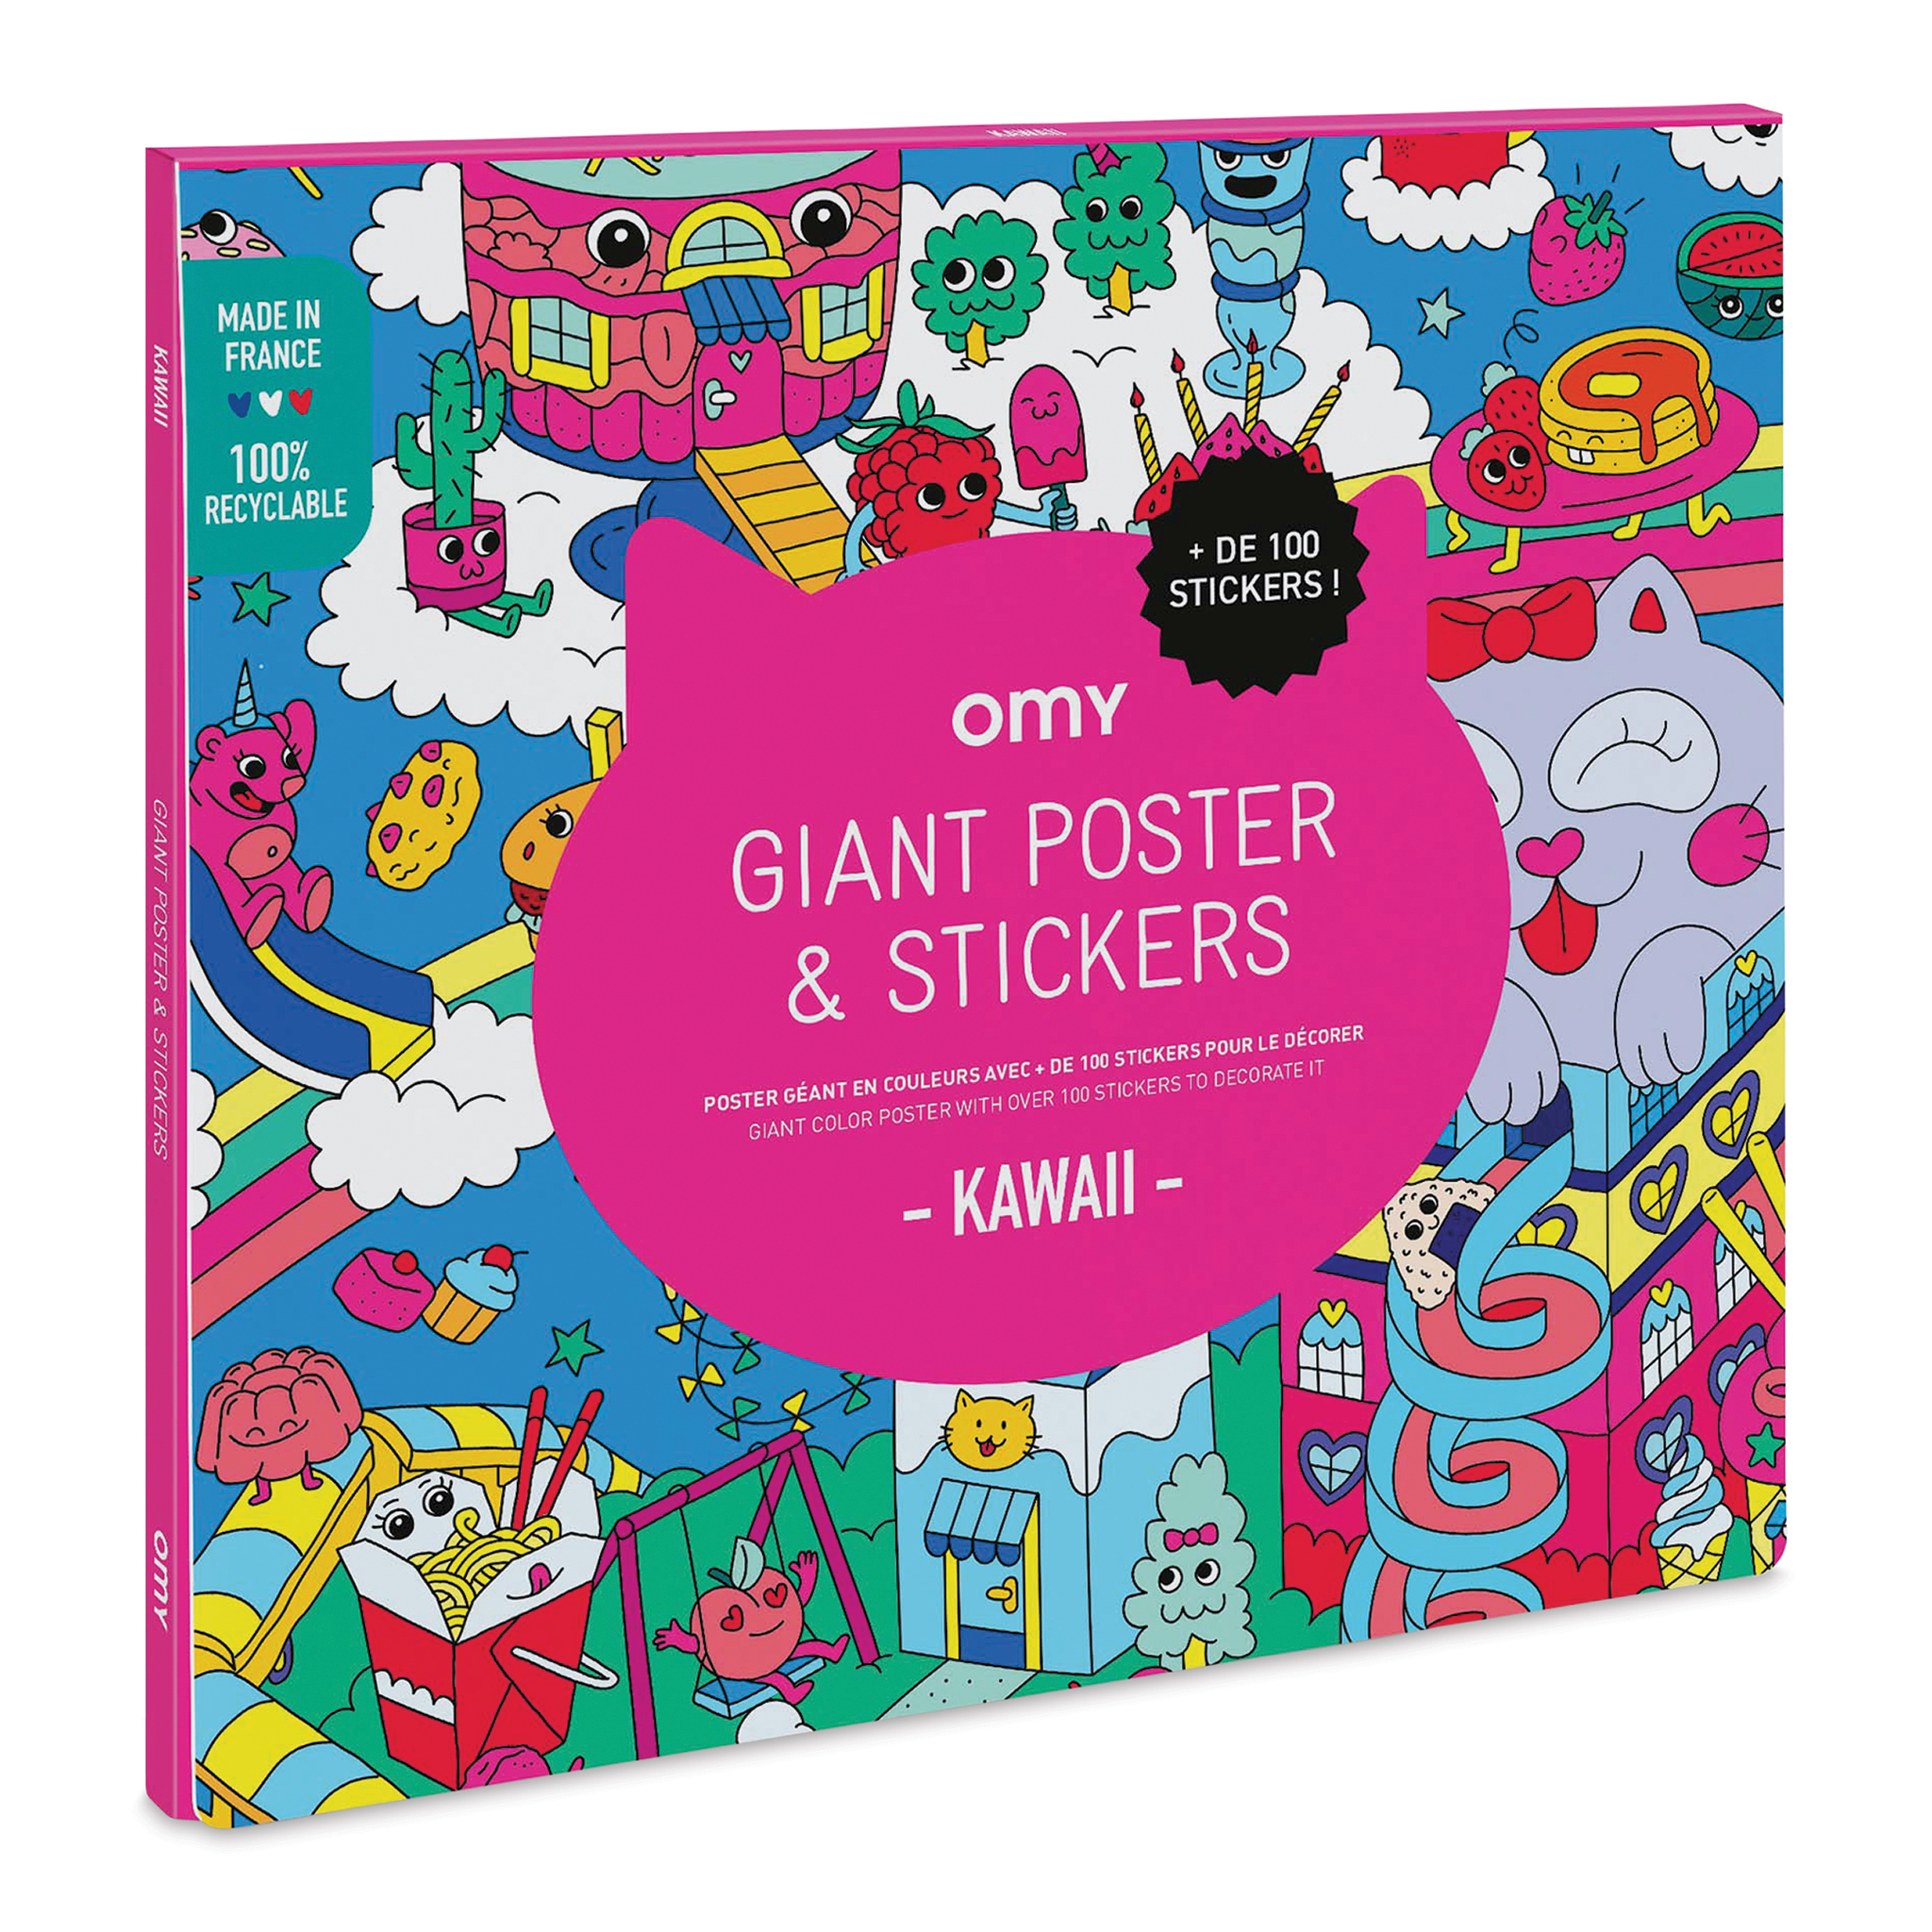 1000+ Things to be Grateful for Sticker Collection, 78263 F, Sticker  Collecting Book 